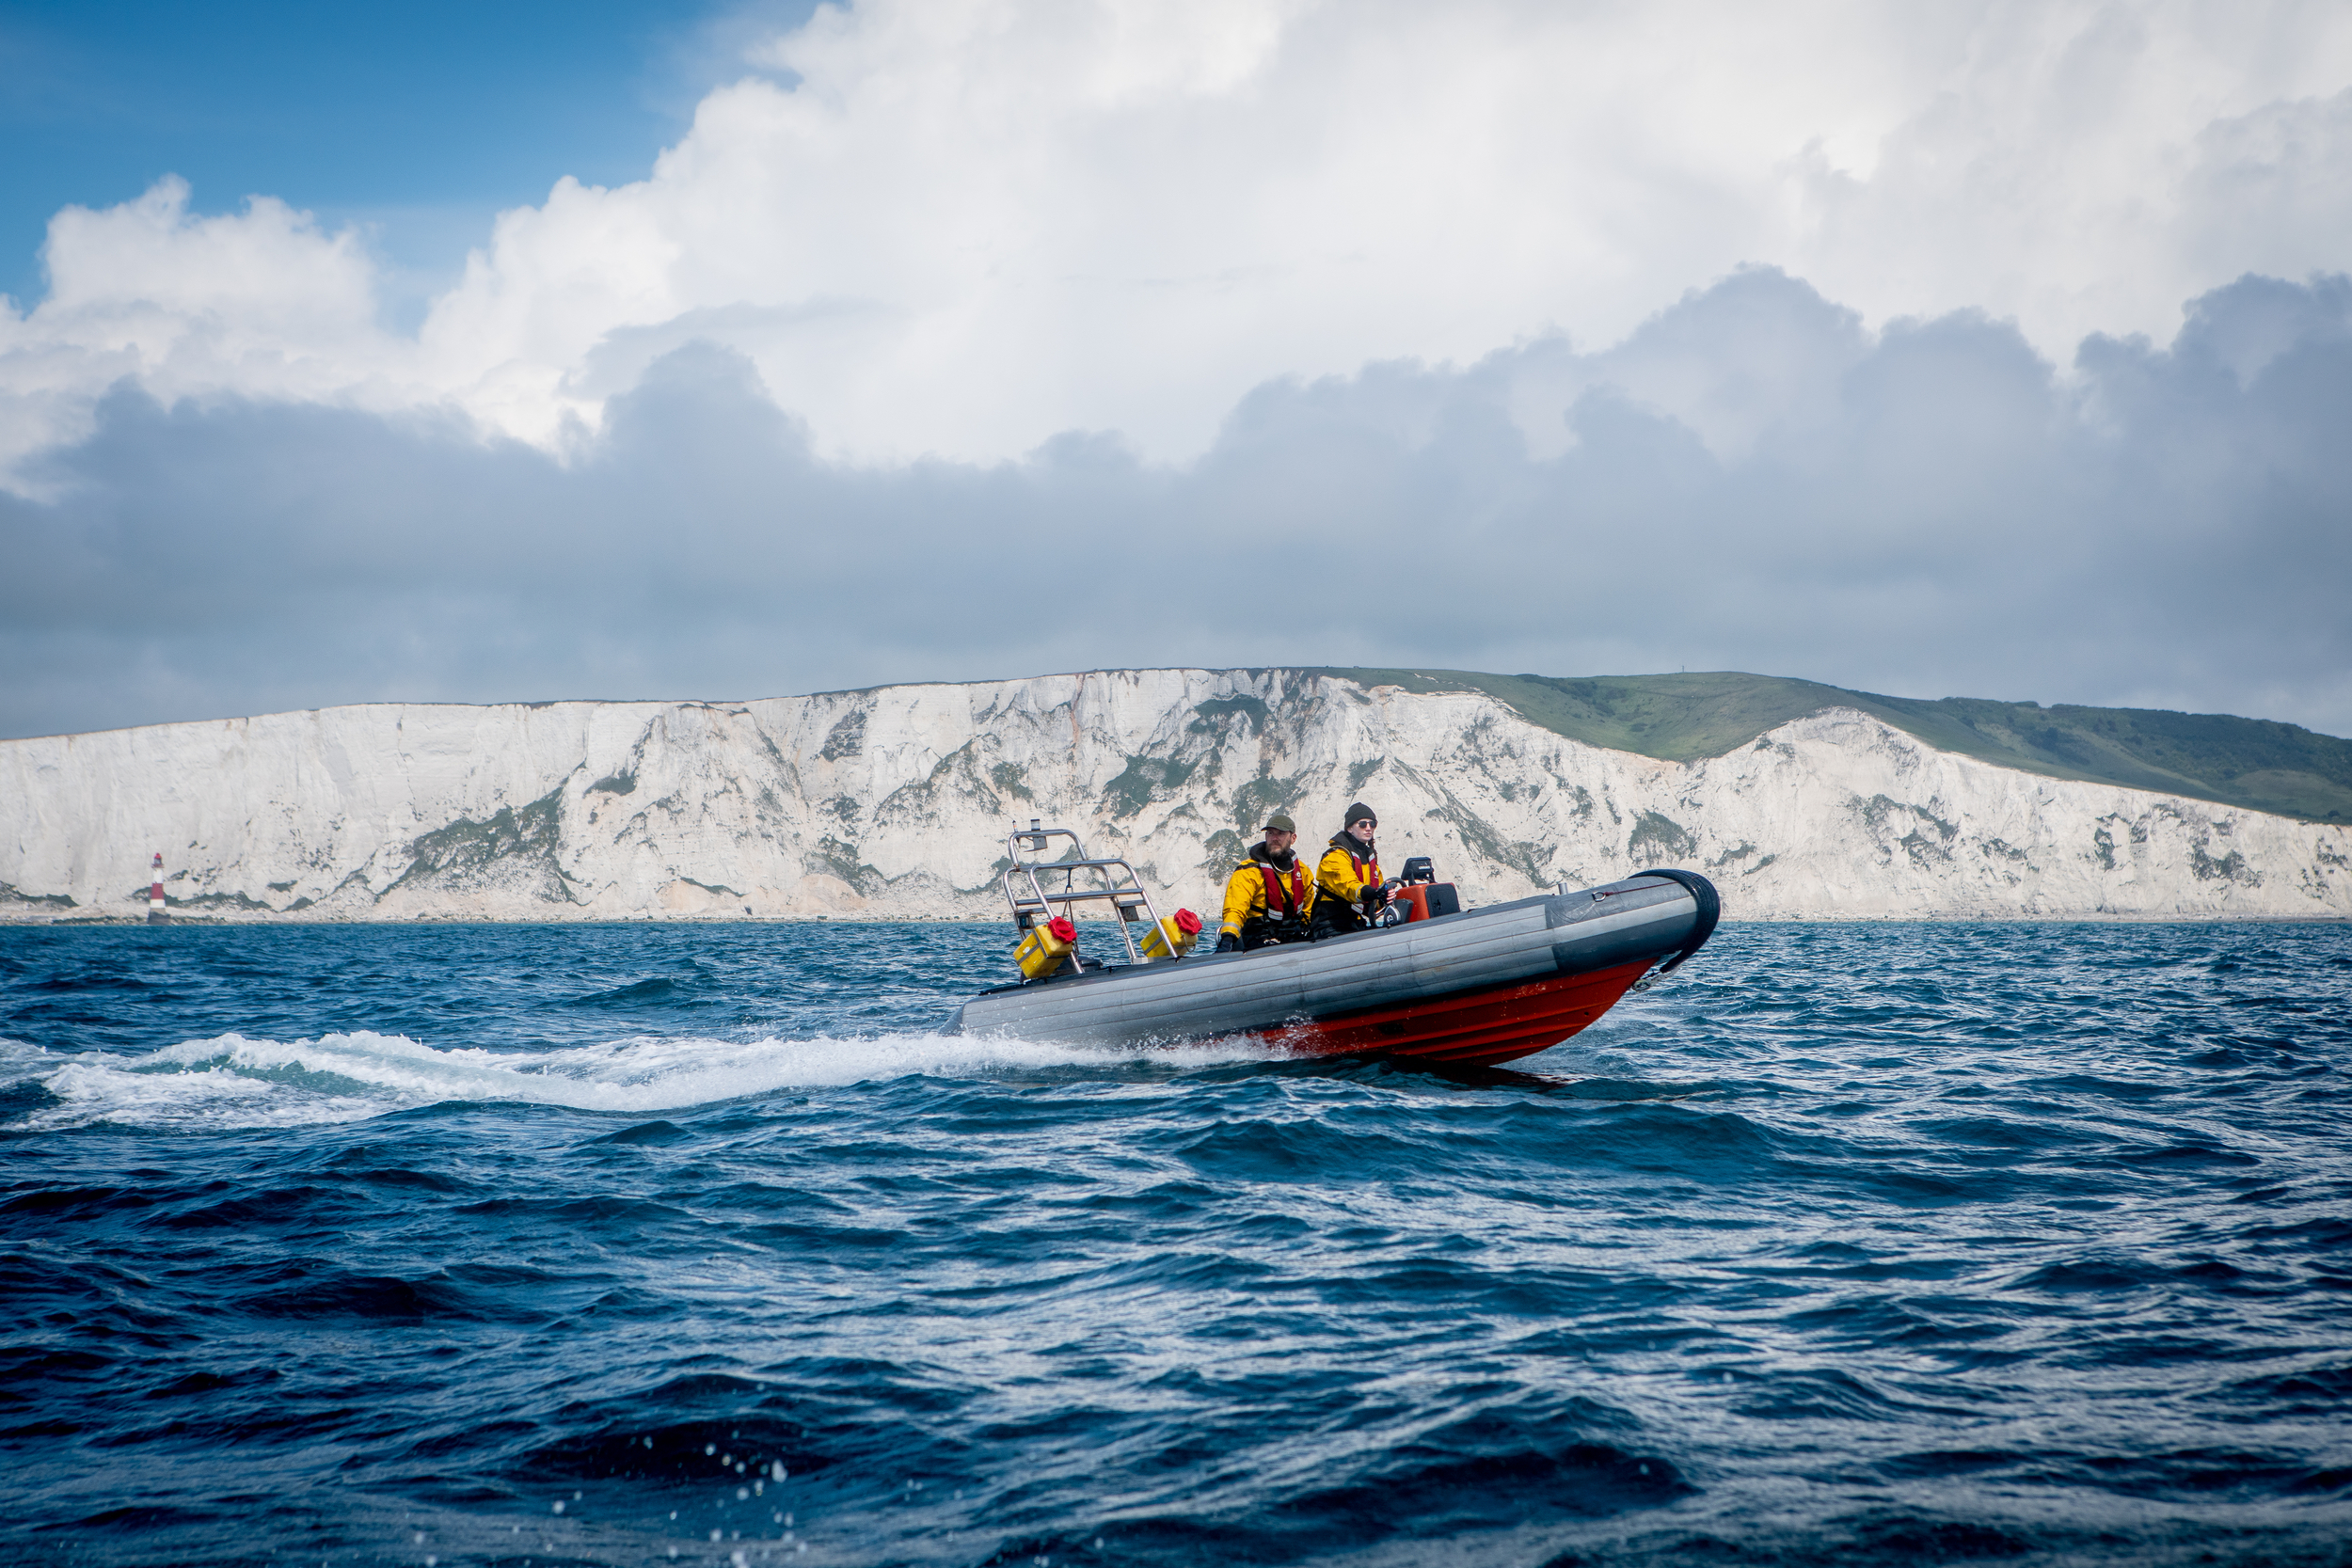 A Greenpeace rib in front of white cliffs in English Channel